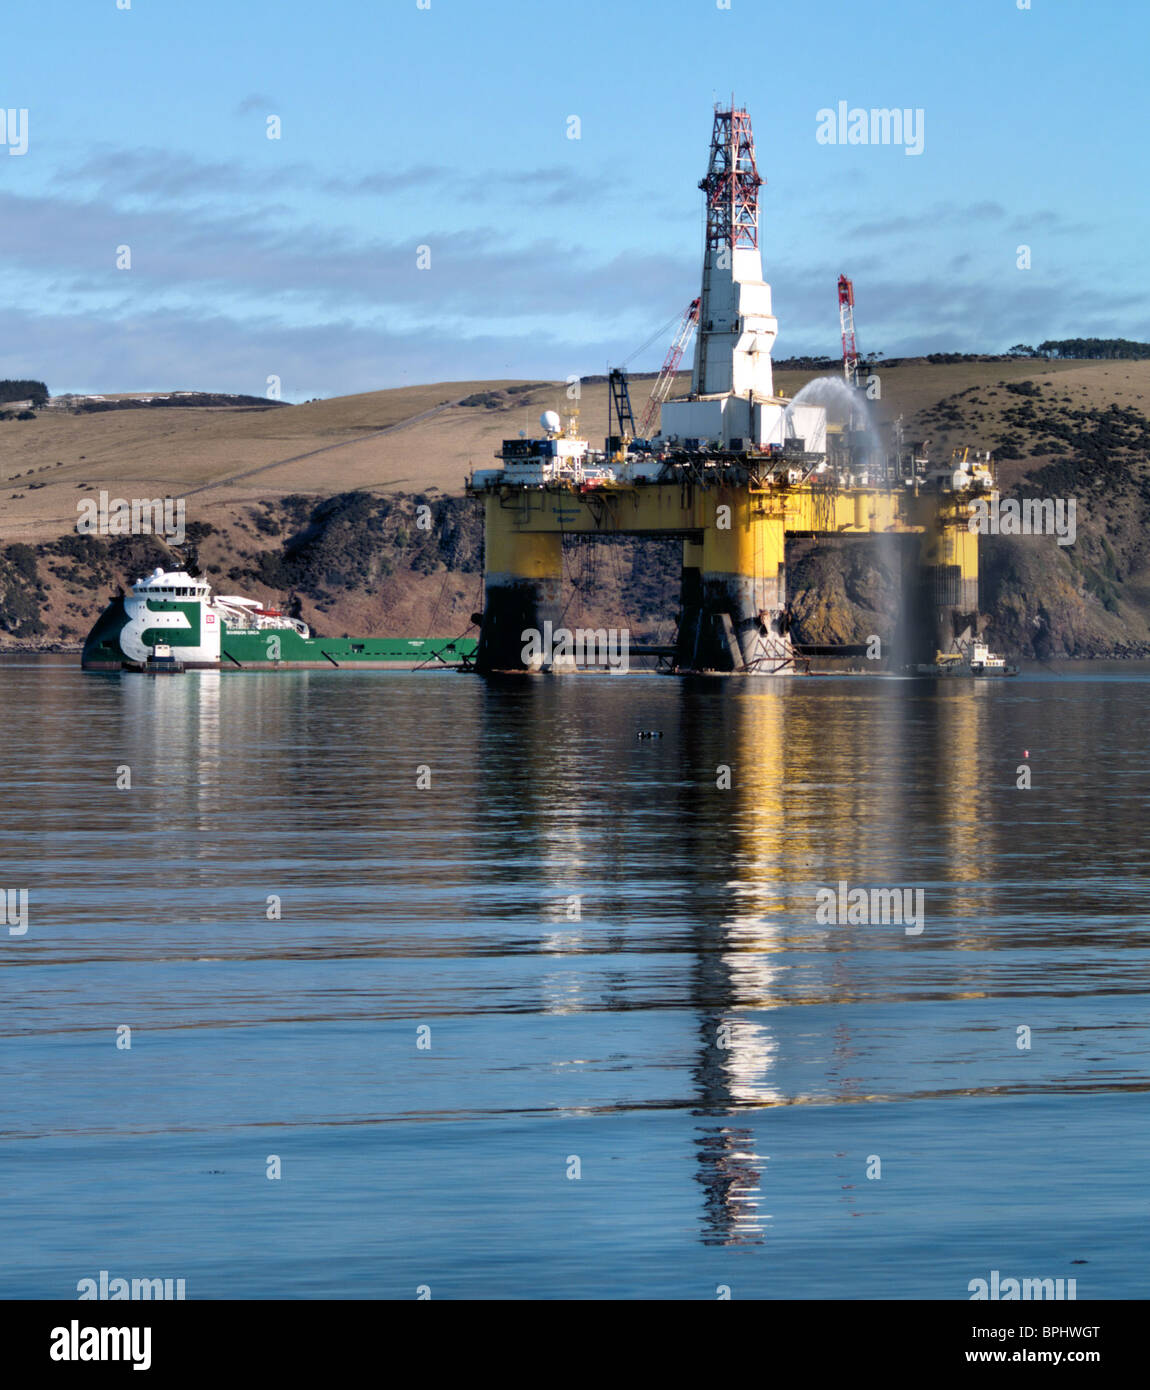 The oil rig tug 'Orca' with her revolutionary X bow, lifts anchors on the Semi-submersible Oil Rig the 'Transocean Rather' Stock Photo